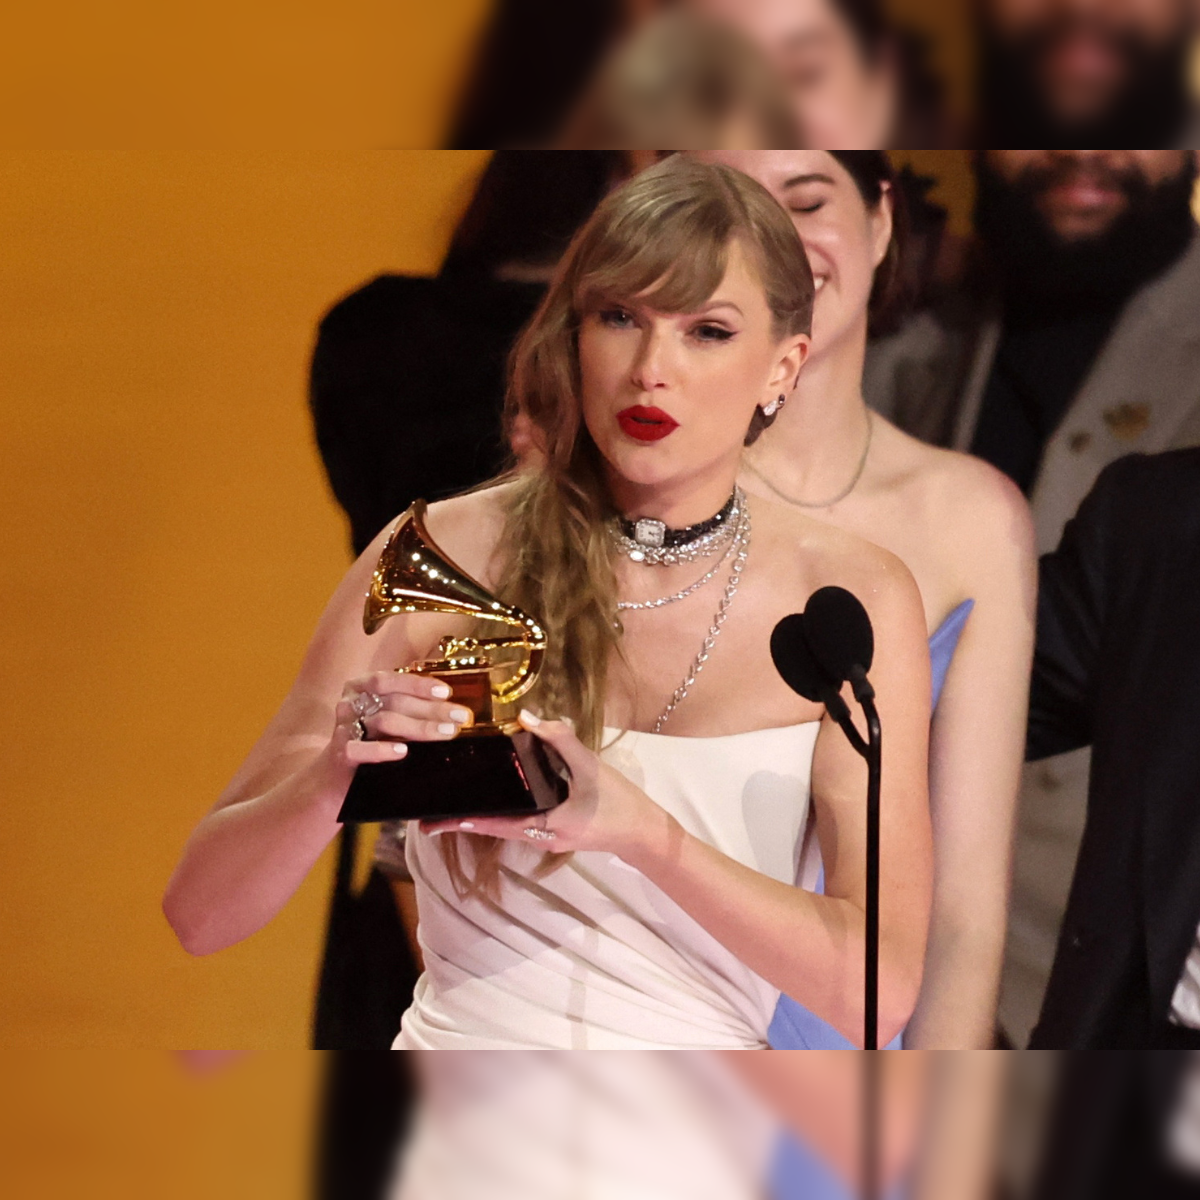 Taylor Swift announced new album at the Grammys only because she won